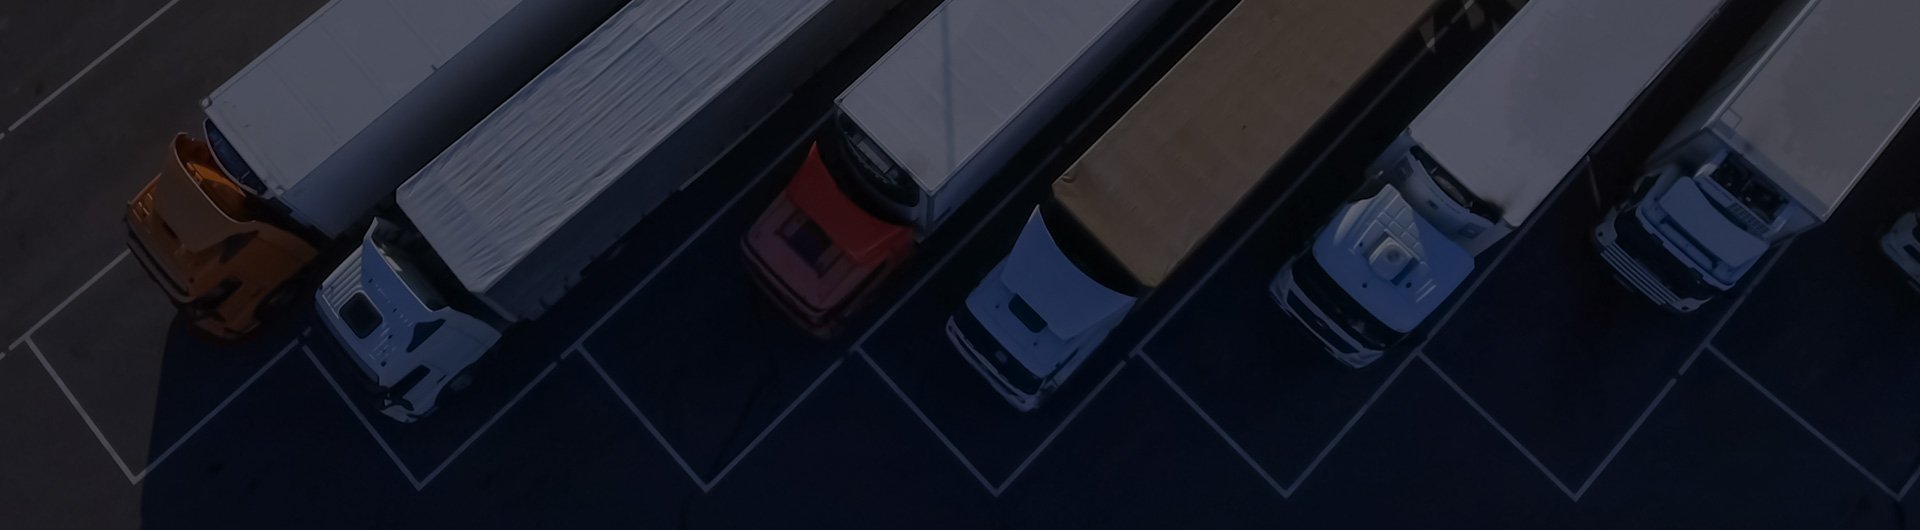 Aerial view of trucks in a parking lot.